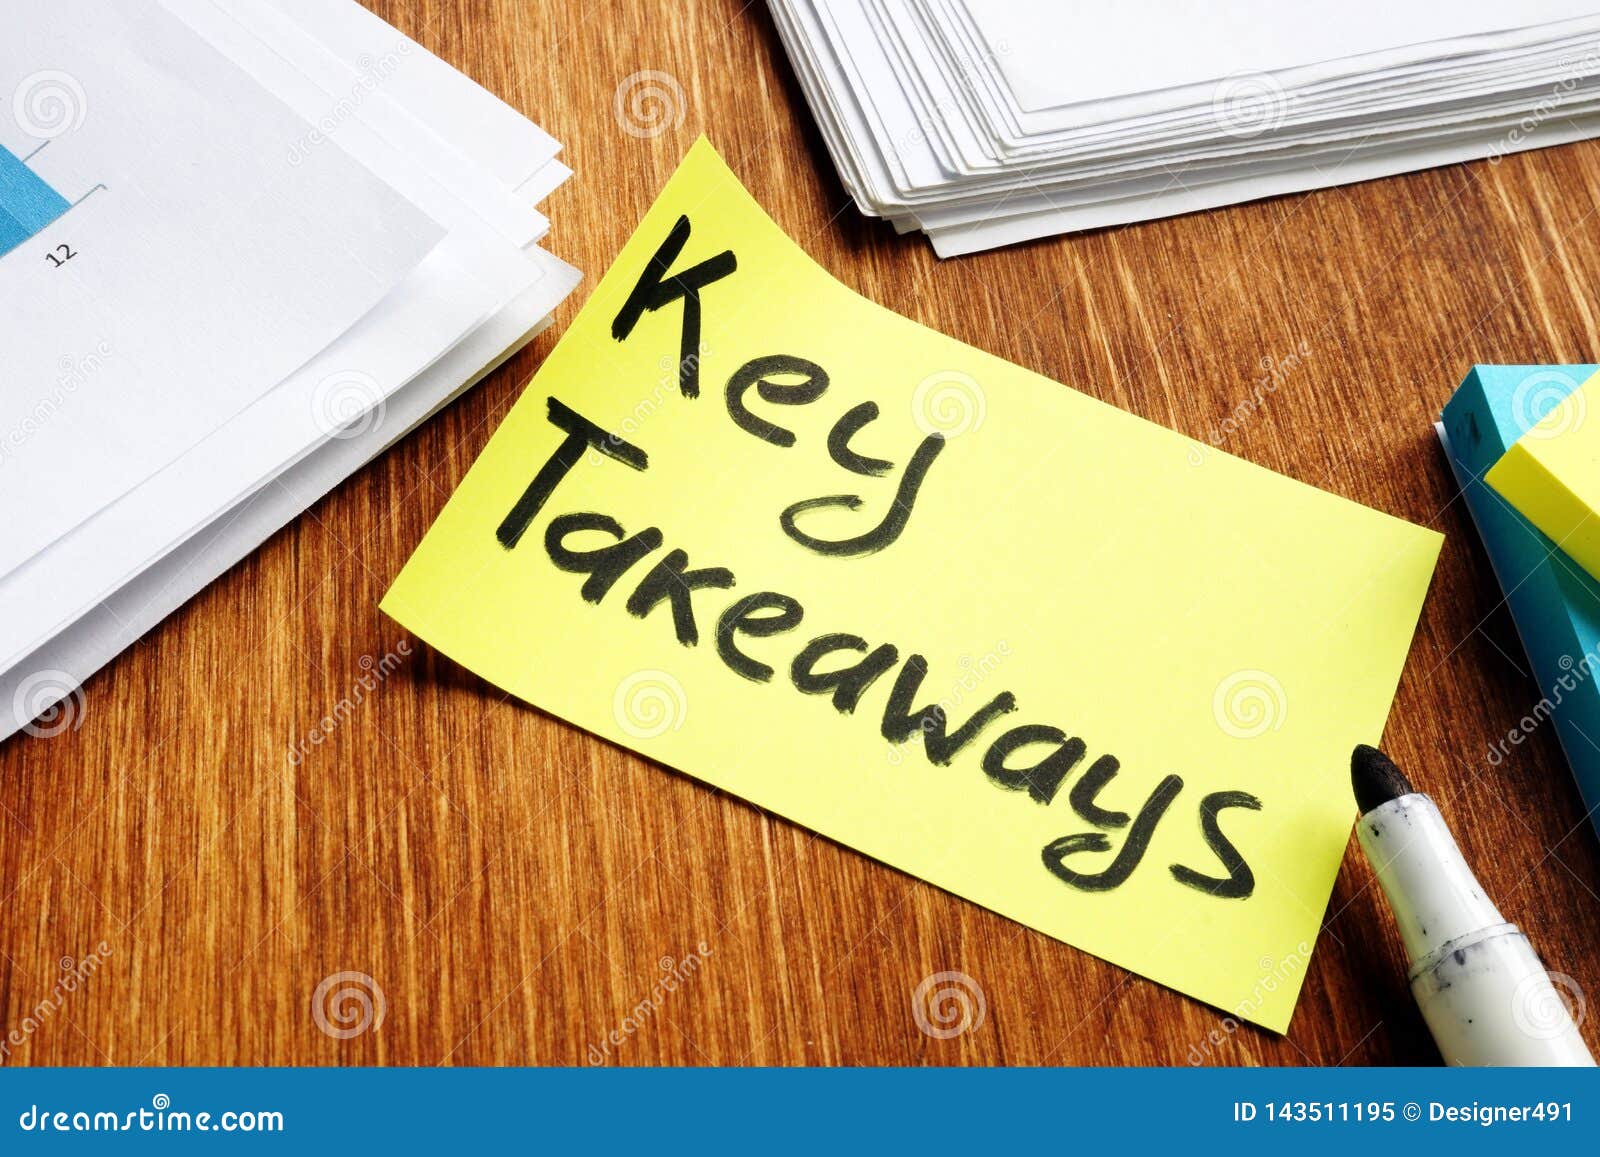 key takeaways. memo stick and pepers